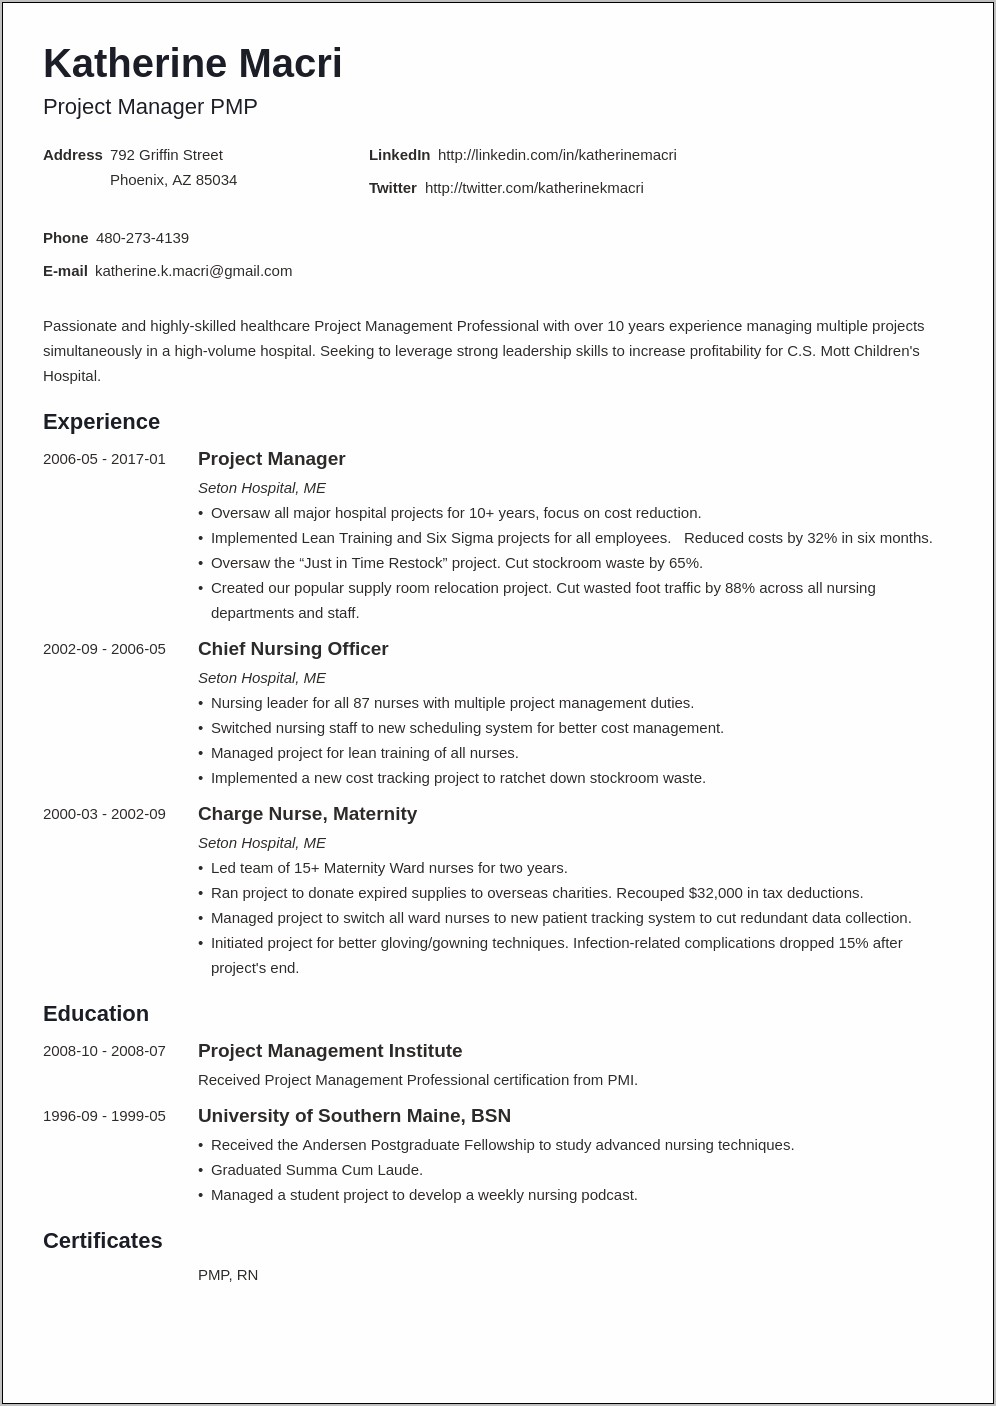 Example Resume For Project Management Assistant